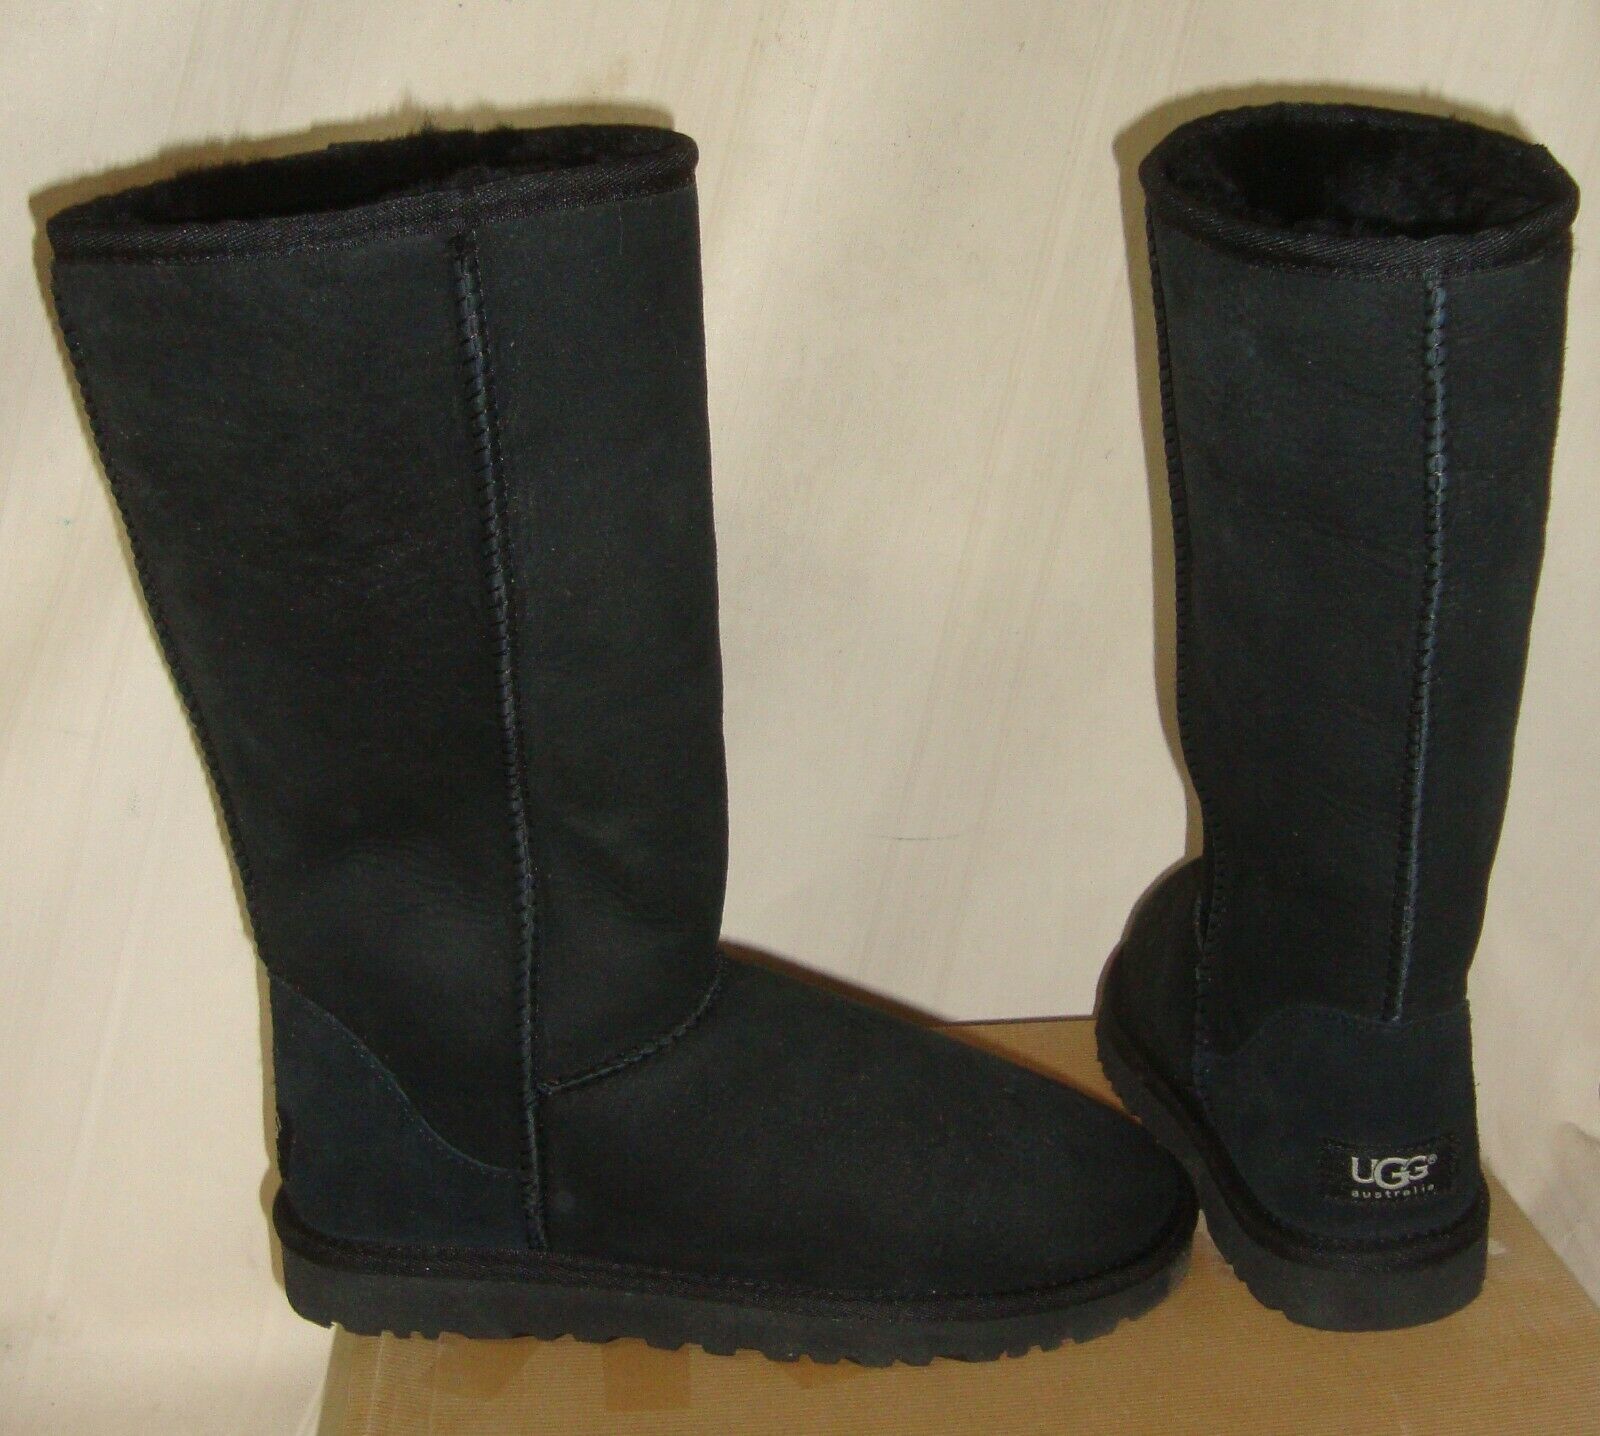 Primary image for UGG Australia CLASSIC TALL Black Suede Sheepskin Boots US 8,EU 39 NEW #5815